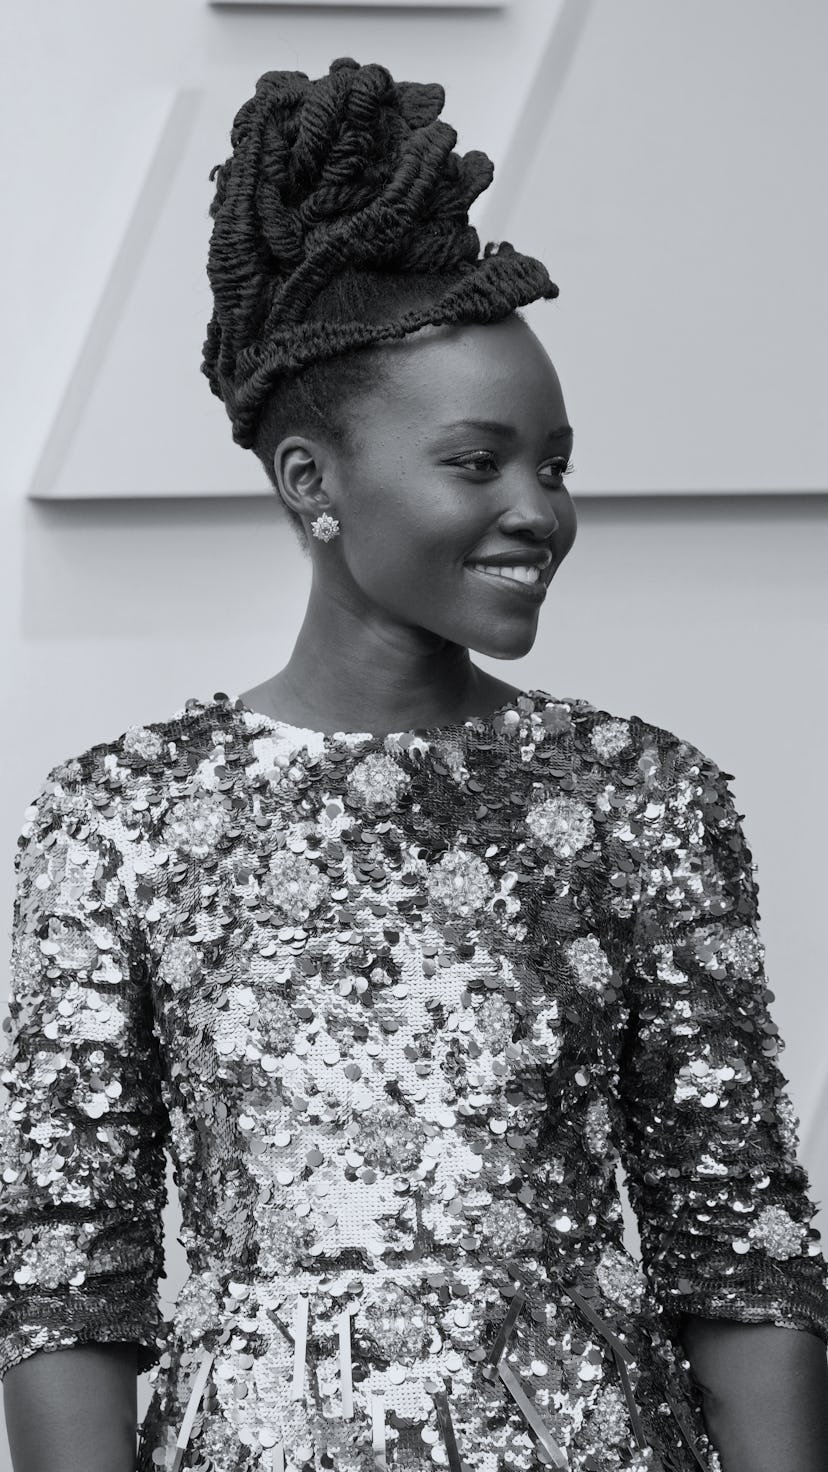 Lupita Nyong'o and other stars wearing sequins at the 2022 Oscars.